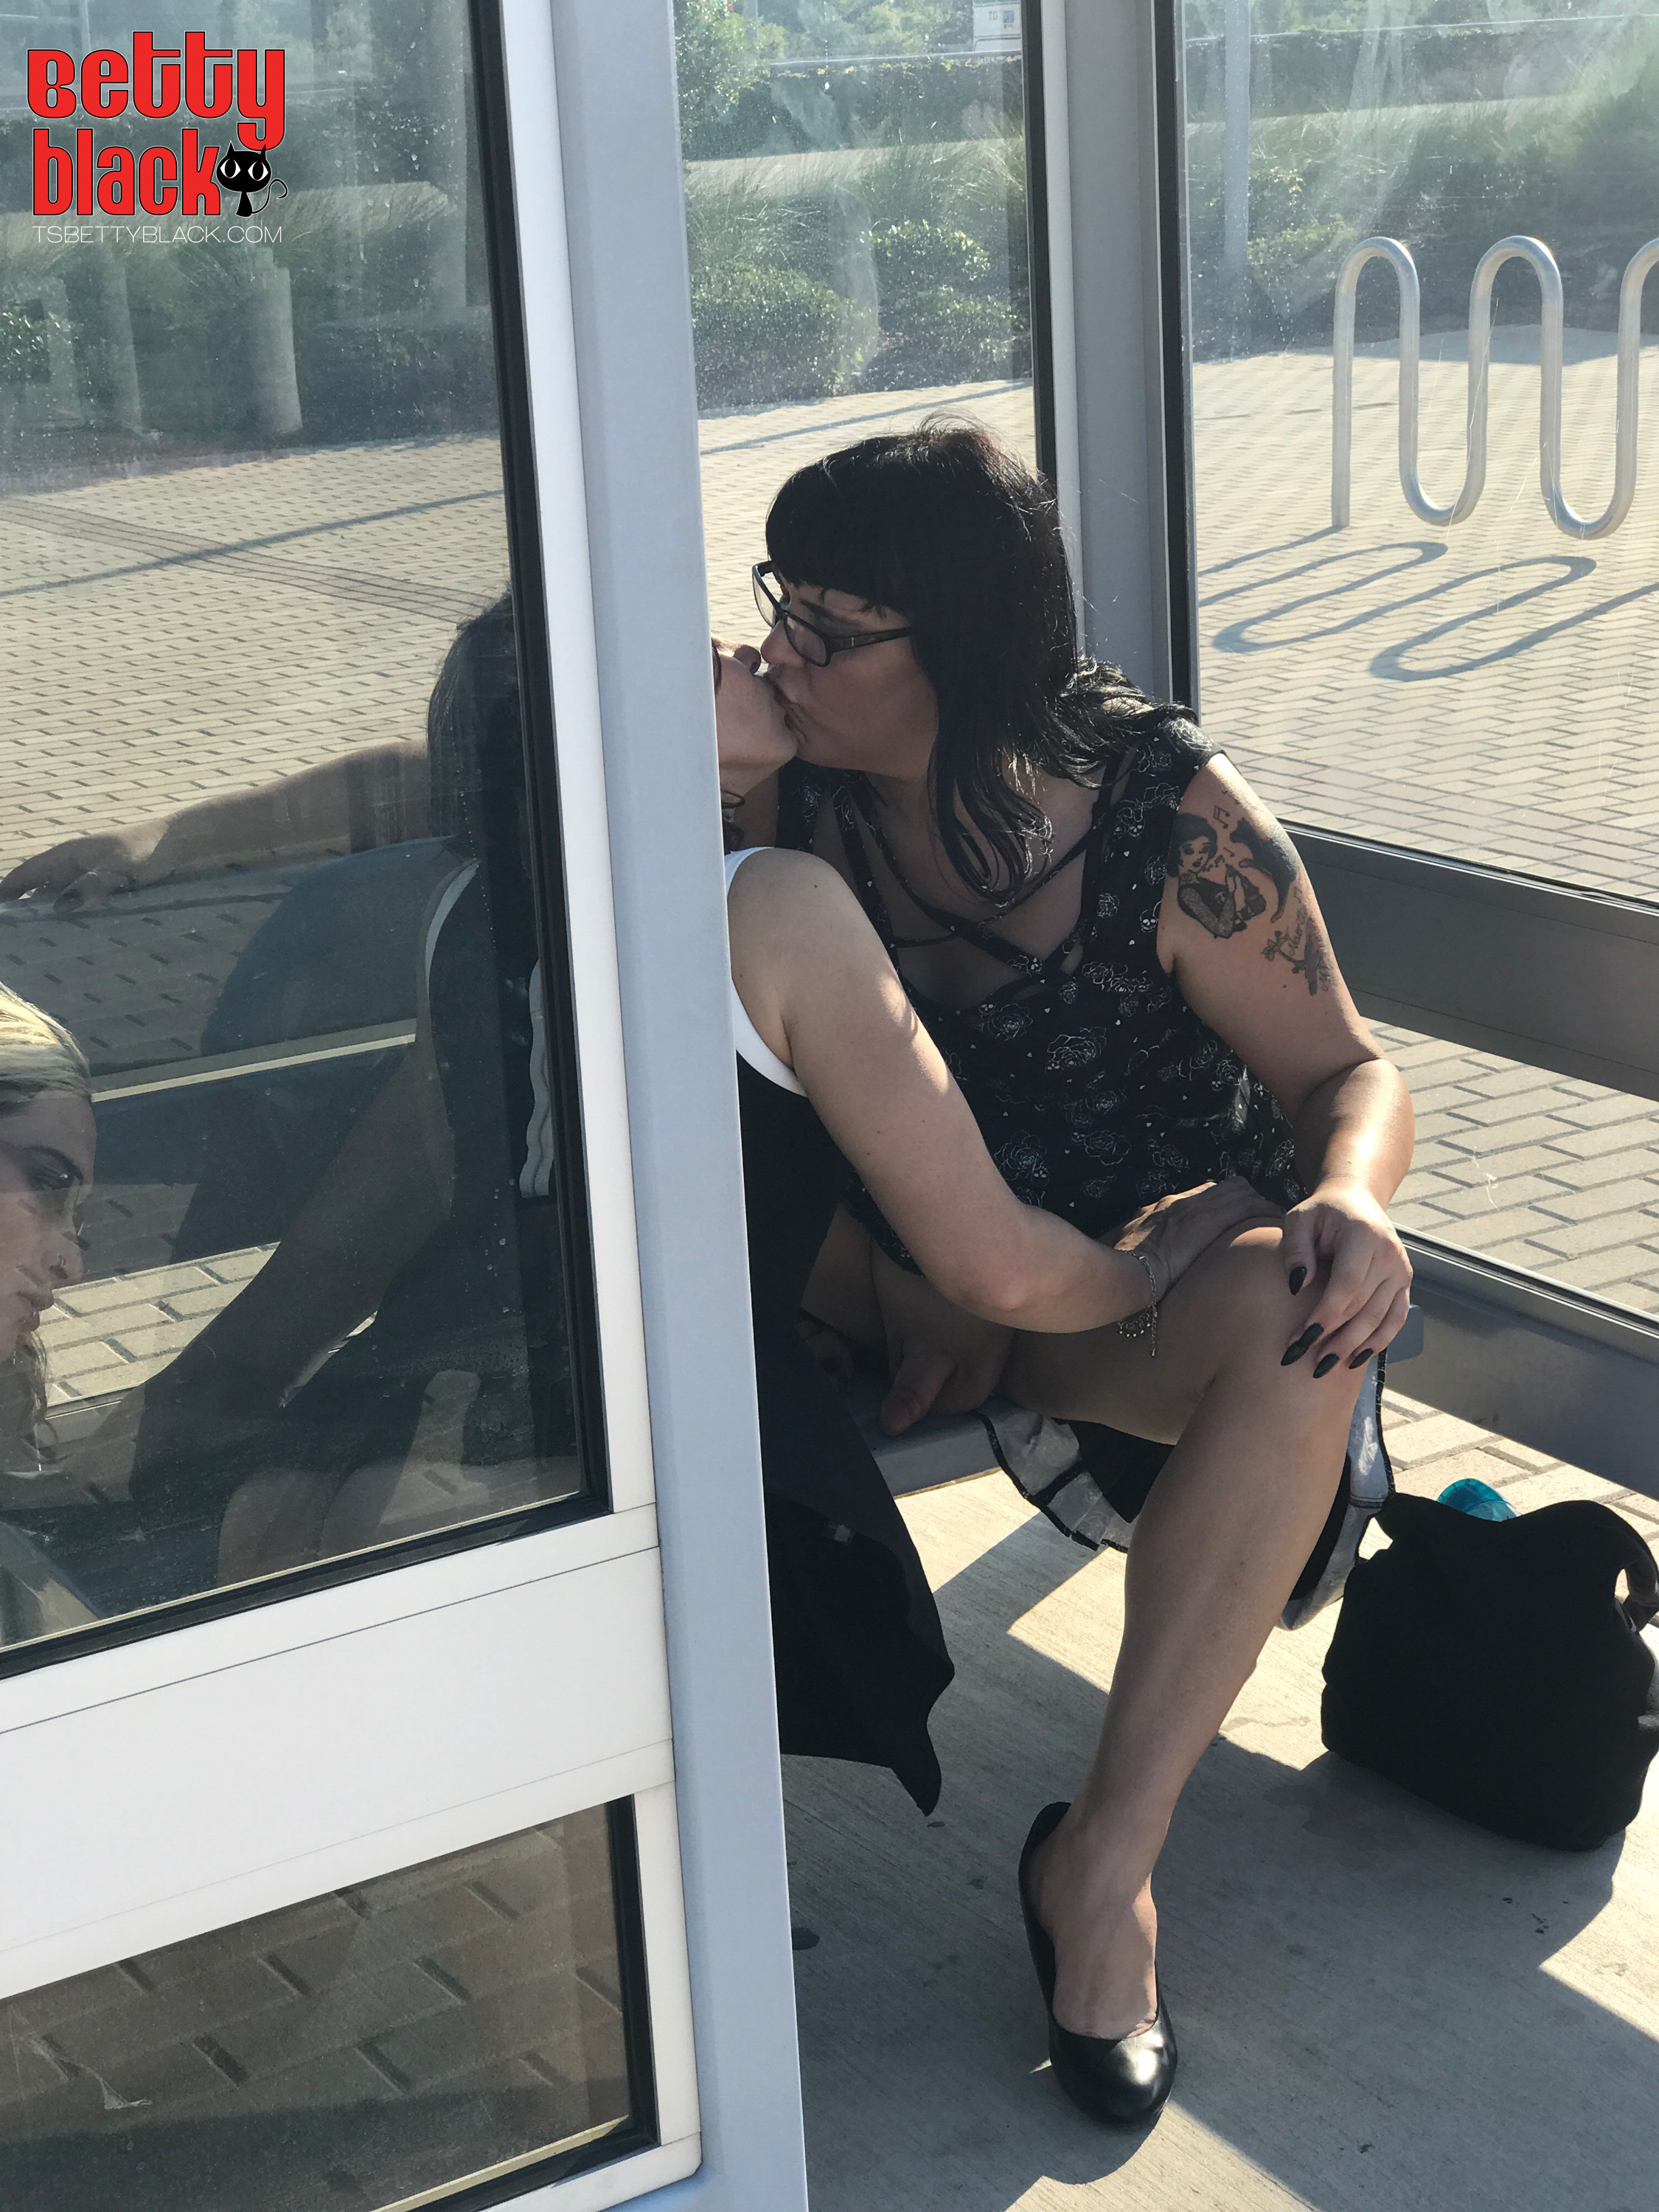 Bus stop threesome shemale pics